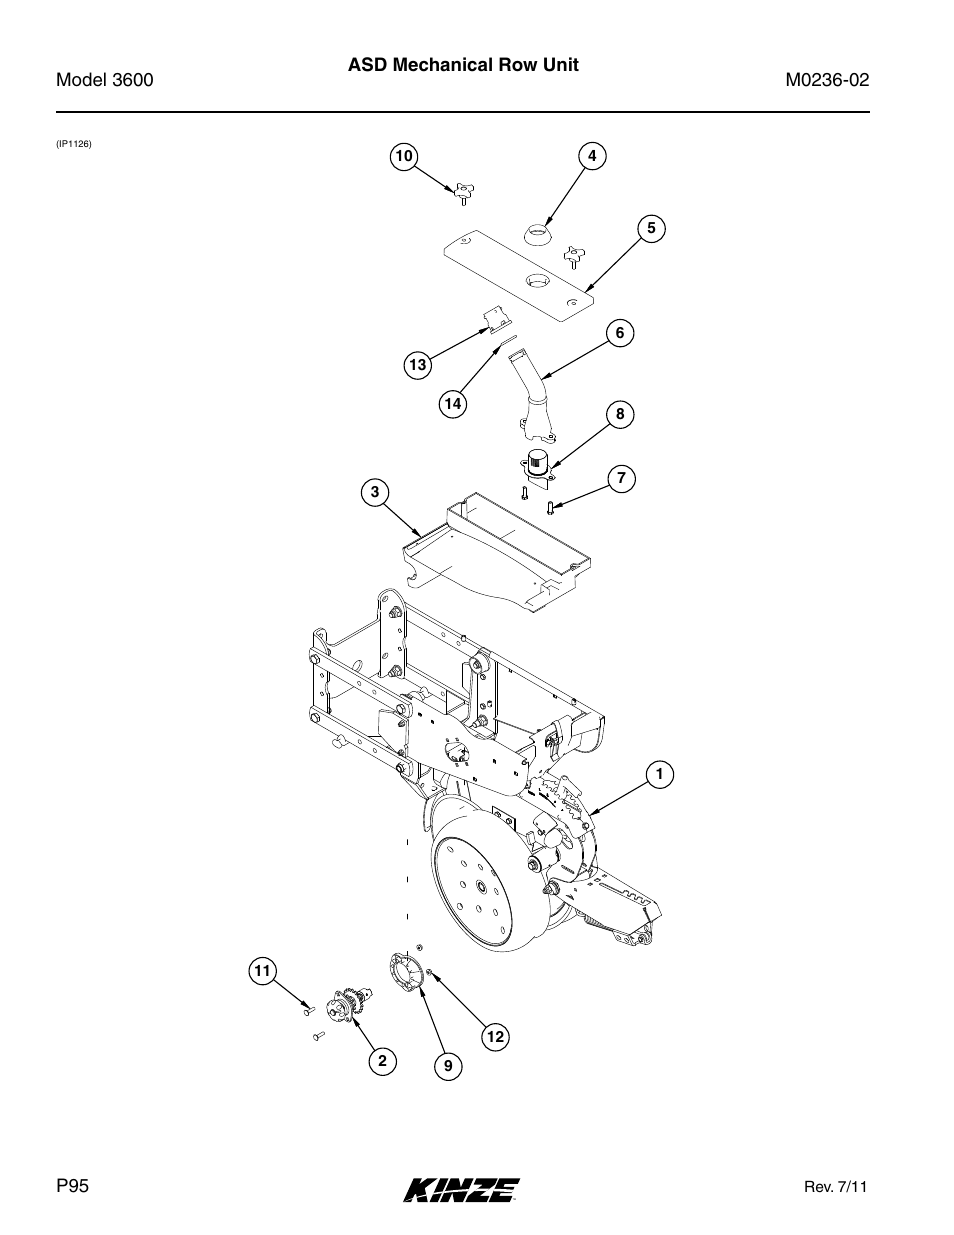 Asd mechanical row unit | Kinze 3600 Lift and Rotate Planter Rev. 5/14 User Manual | Page 98 / 302